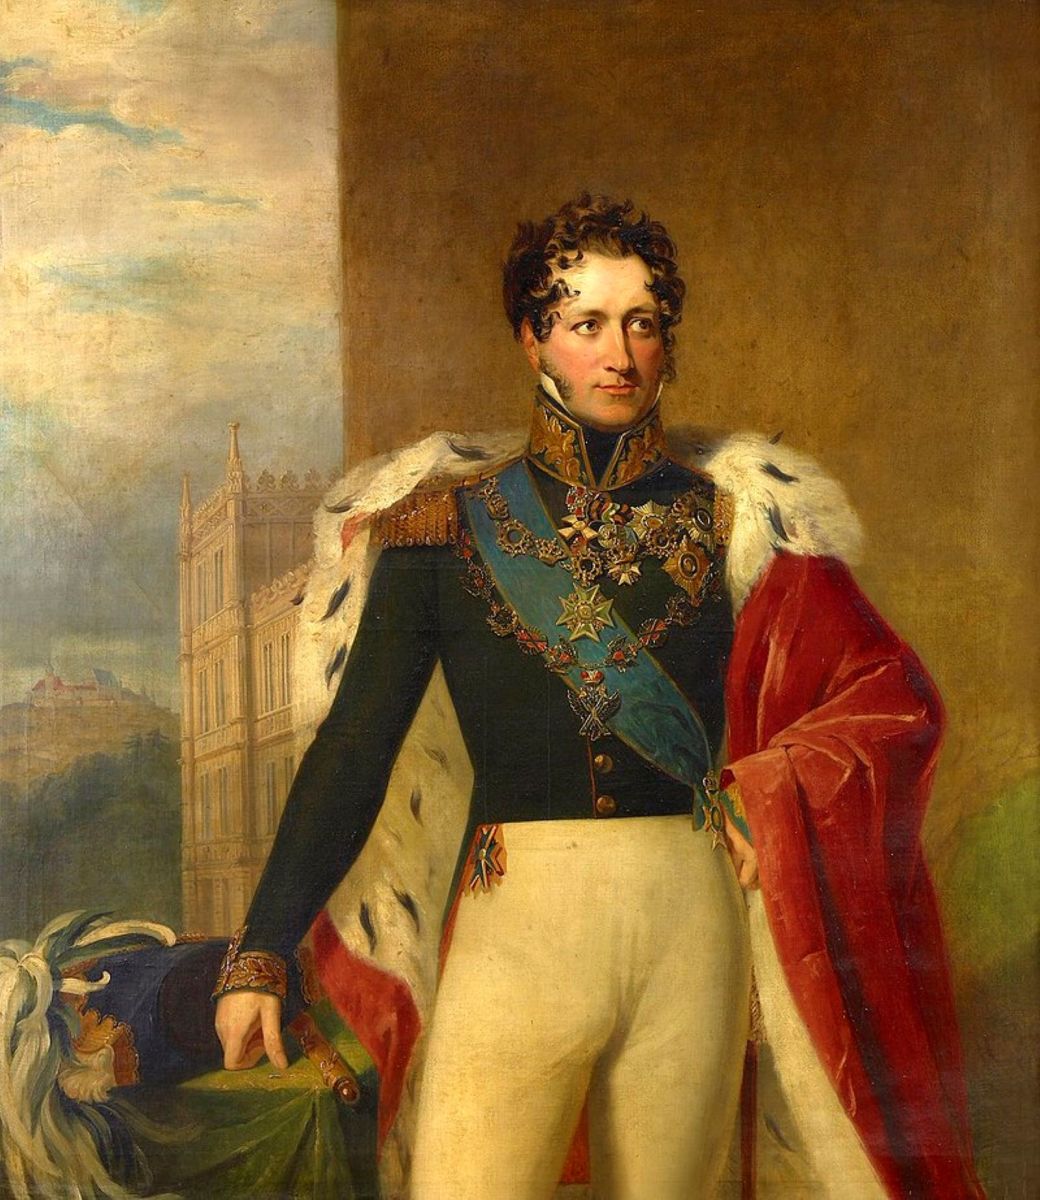 Ernst I, Duke of Saxe-Coburg-Gotha was Prince Albert's father. He and his father Franz transformed the medieval castle into a romantic gothic residence.